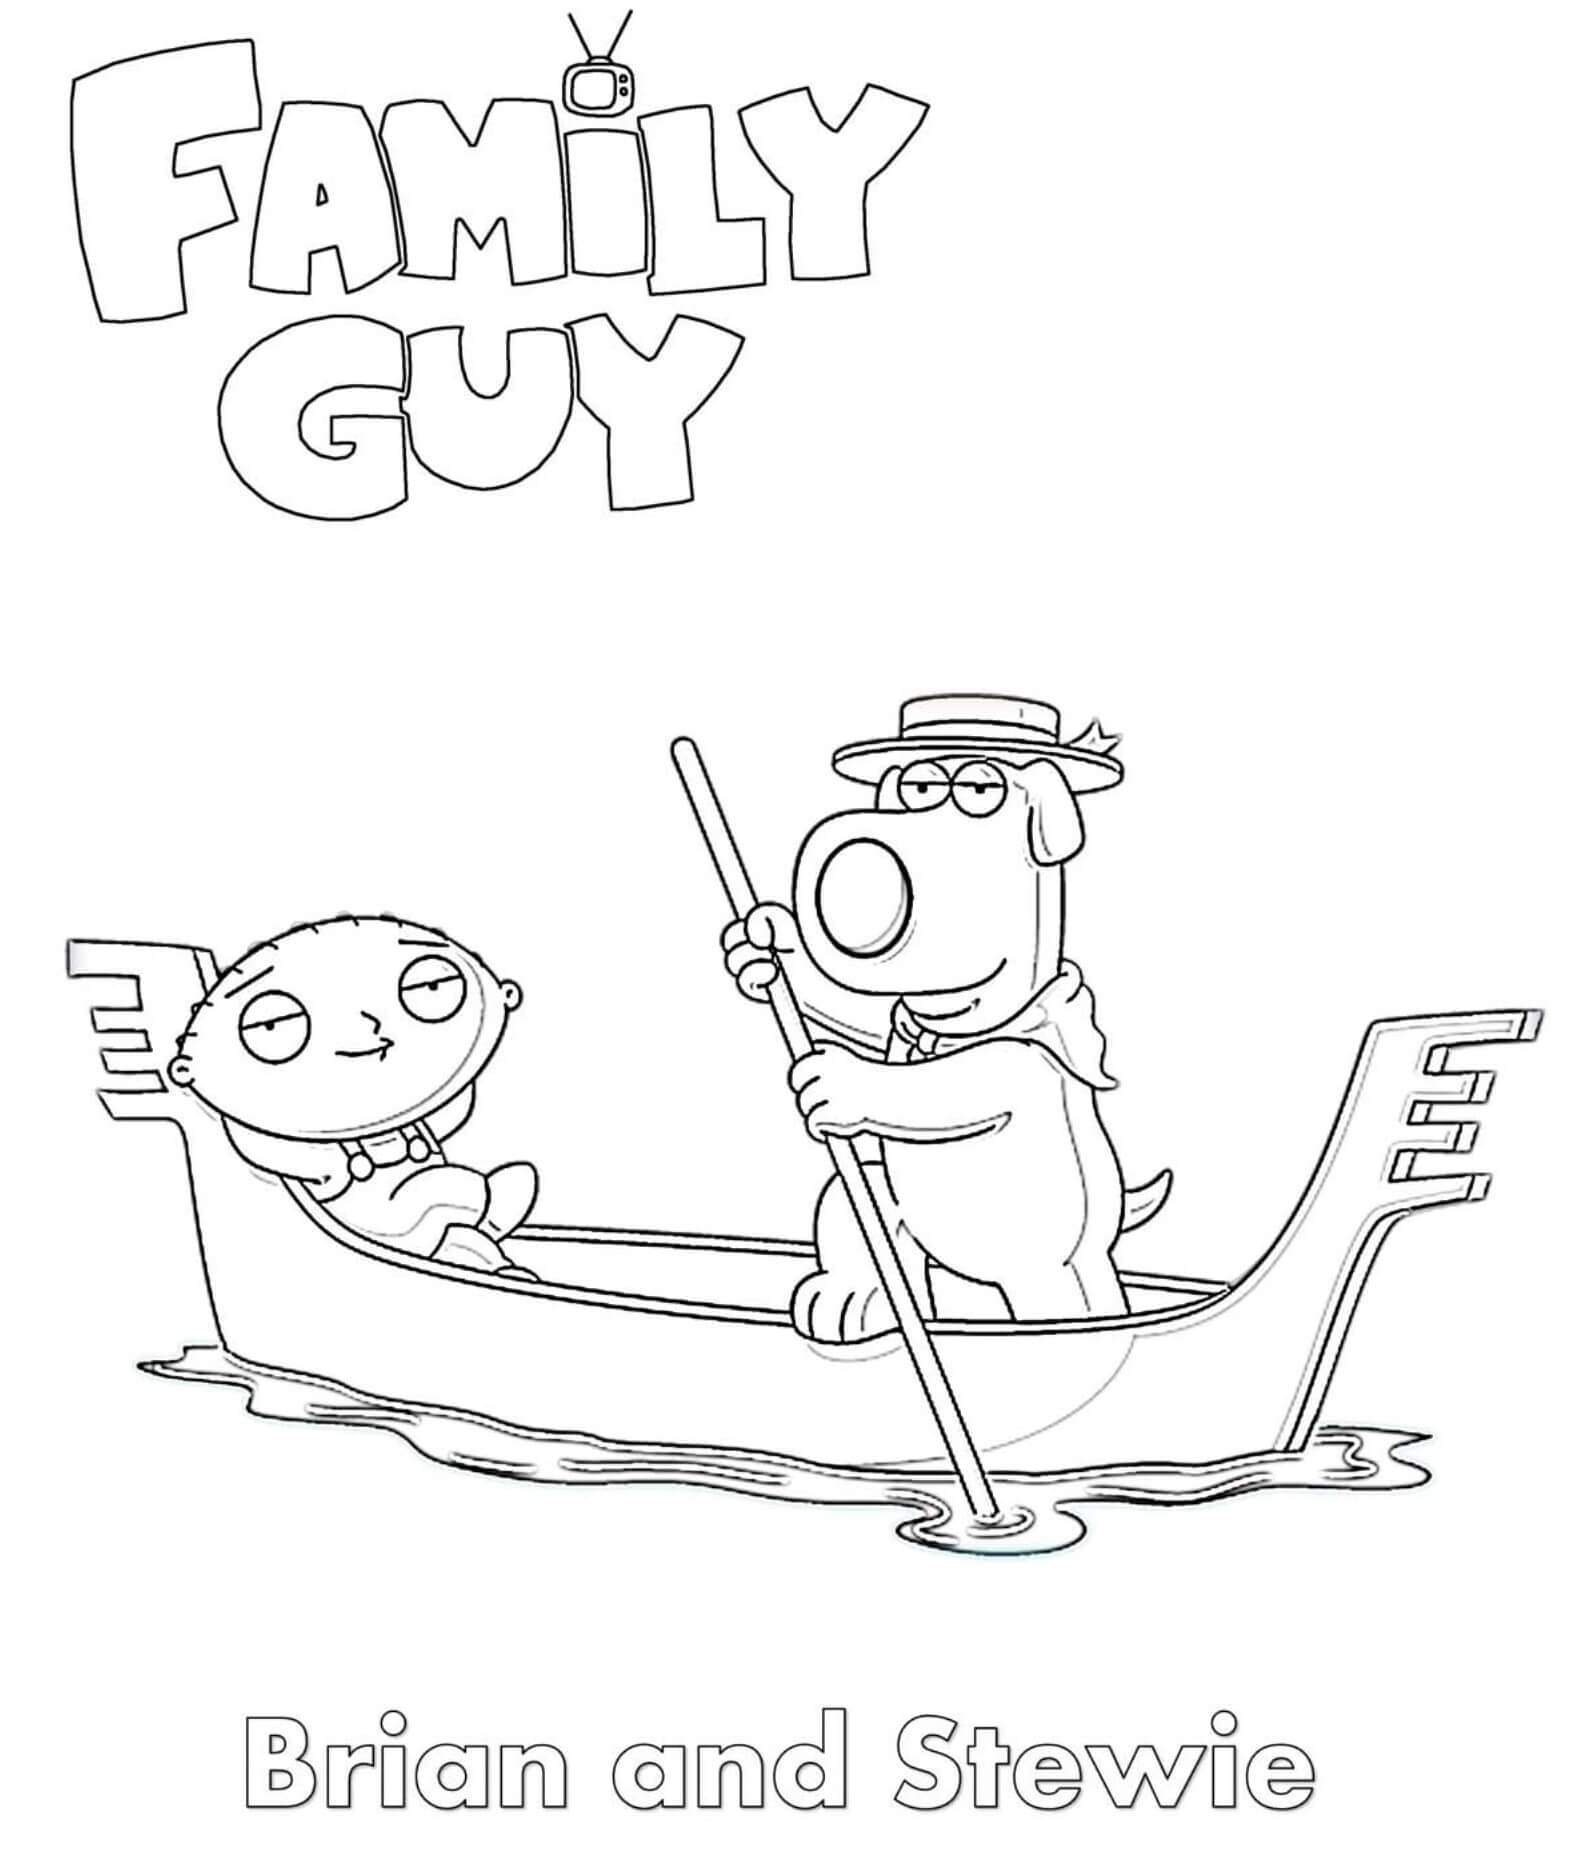 Family Guy Brian And Stewie Coloring Pages - Coloring Cool